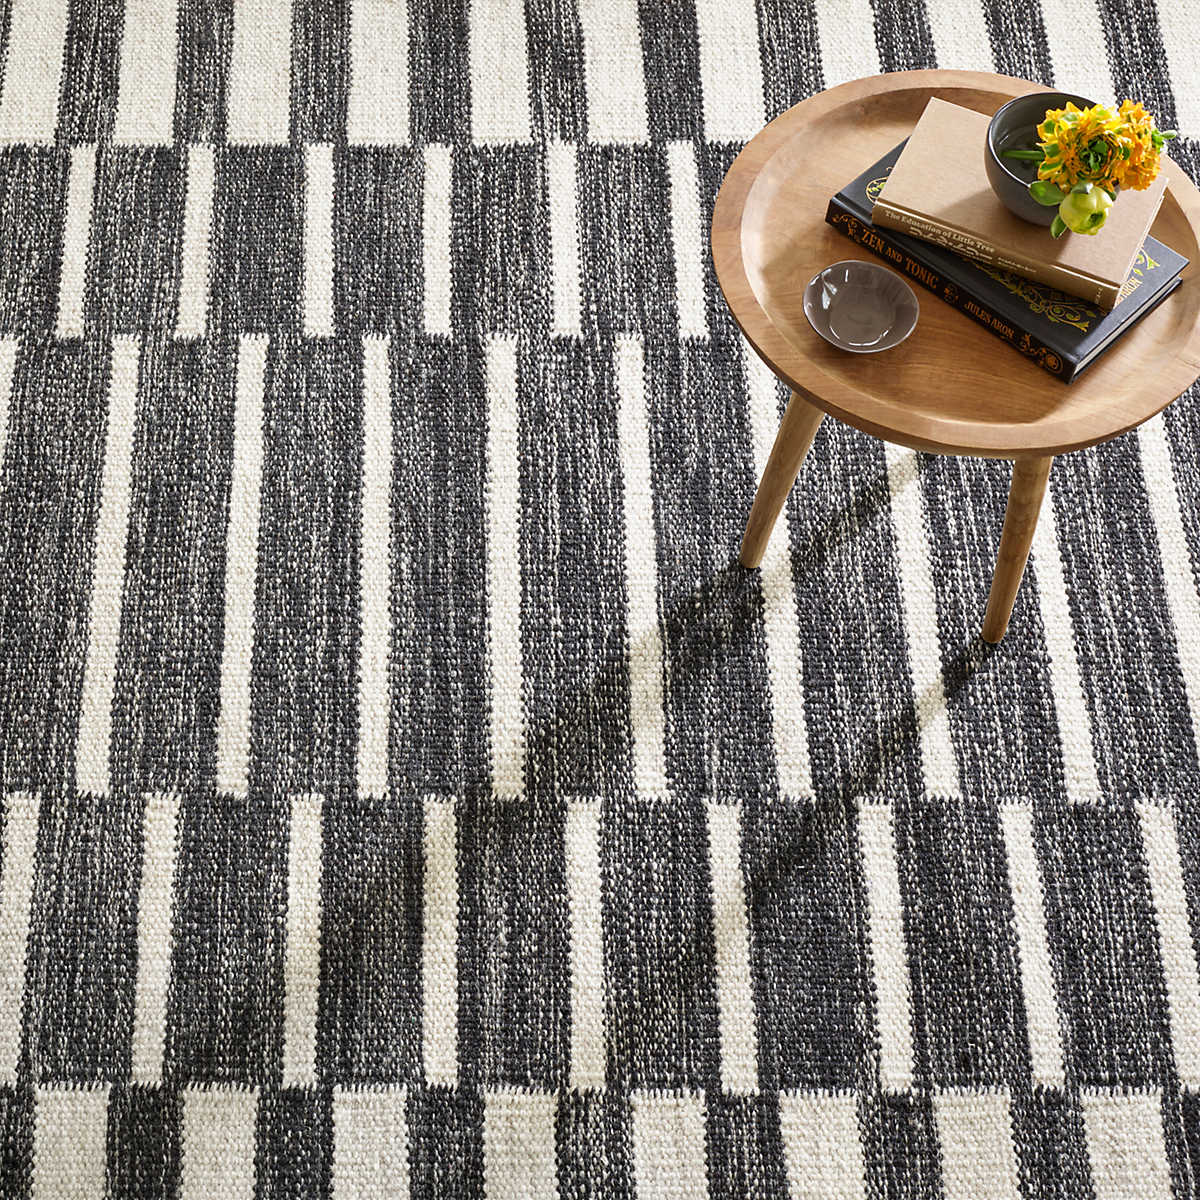 The Heights Charcoal Rug creates the illusion of layers with this gorgeous chunky, flatwoven wool rug. Concentric rectangles of offset ladder stripes make a bold graphic statement. Hand-loomed by artisans from undyed natural fleece wool in marled shades of Charcoal and Ivory. Amethyst Home provides interior design services, furniture, rugs, and lighting in the Des Moines metro area.